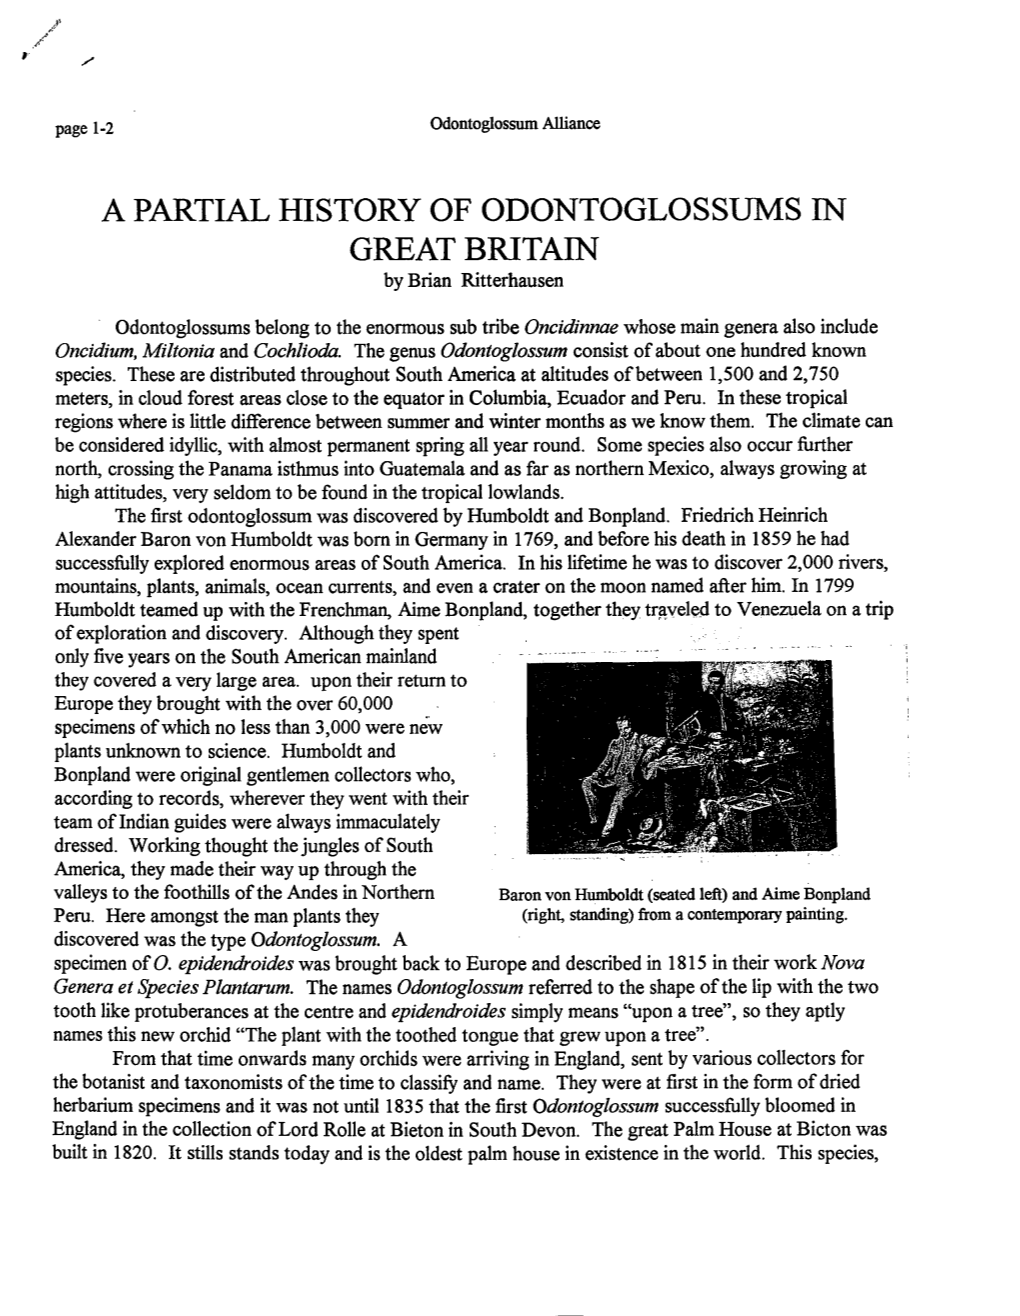 A PARTIAL HISTORY of ODONTOGLOSSUMS in GREAT BRITAIN by Brian Ritterhausen